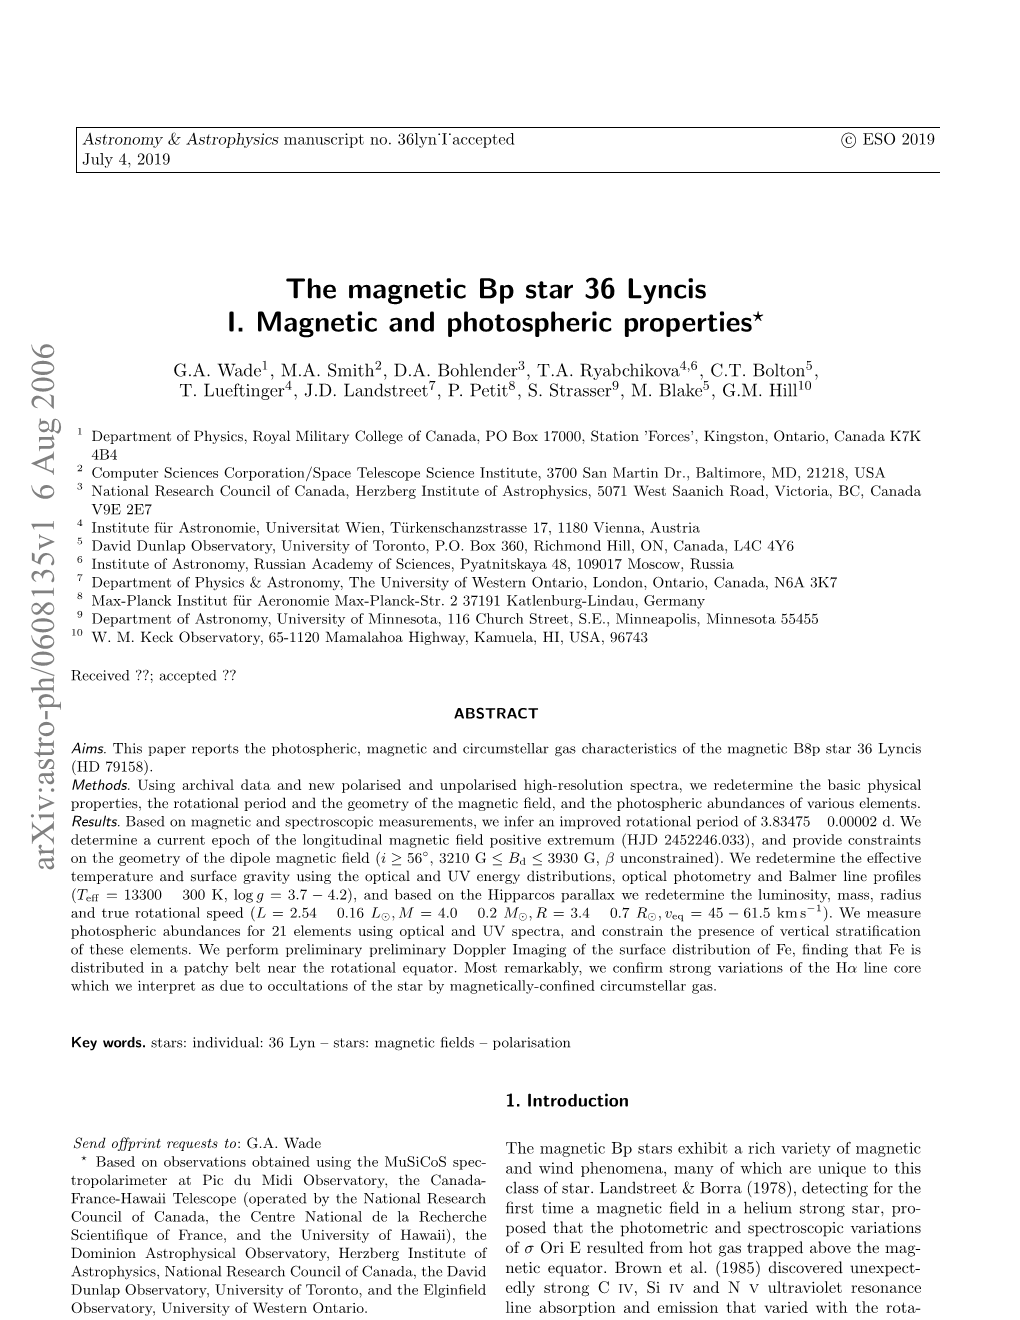 The Magnetic Bp Star 36 Lyncis, I. Magnetic and Photospheric Properties